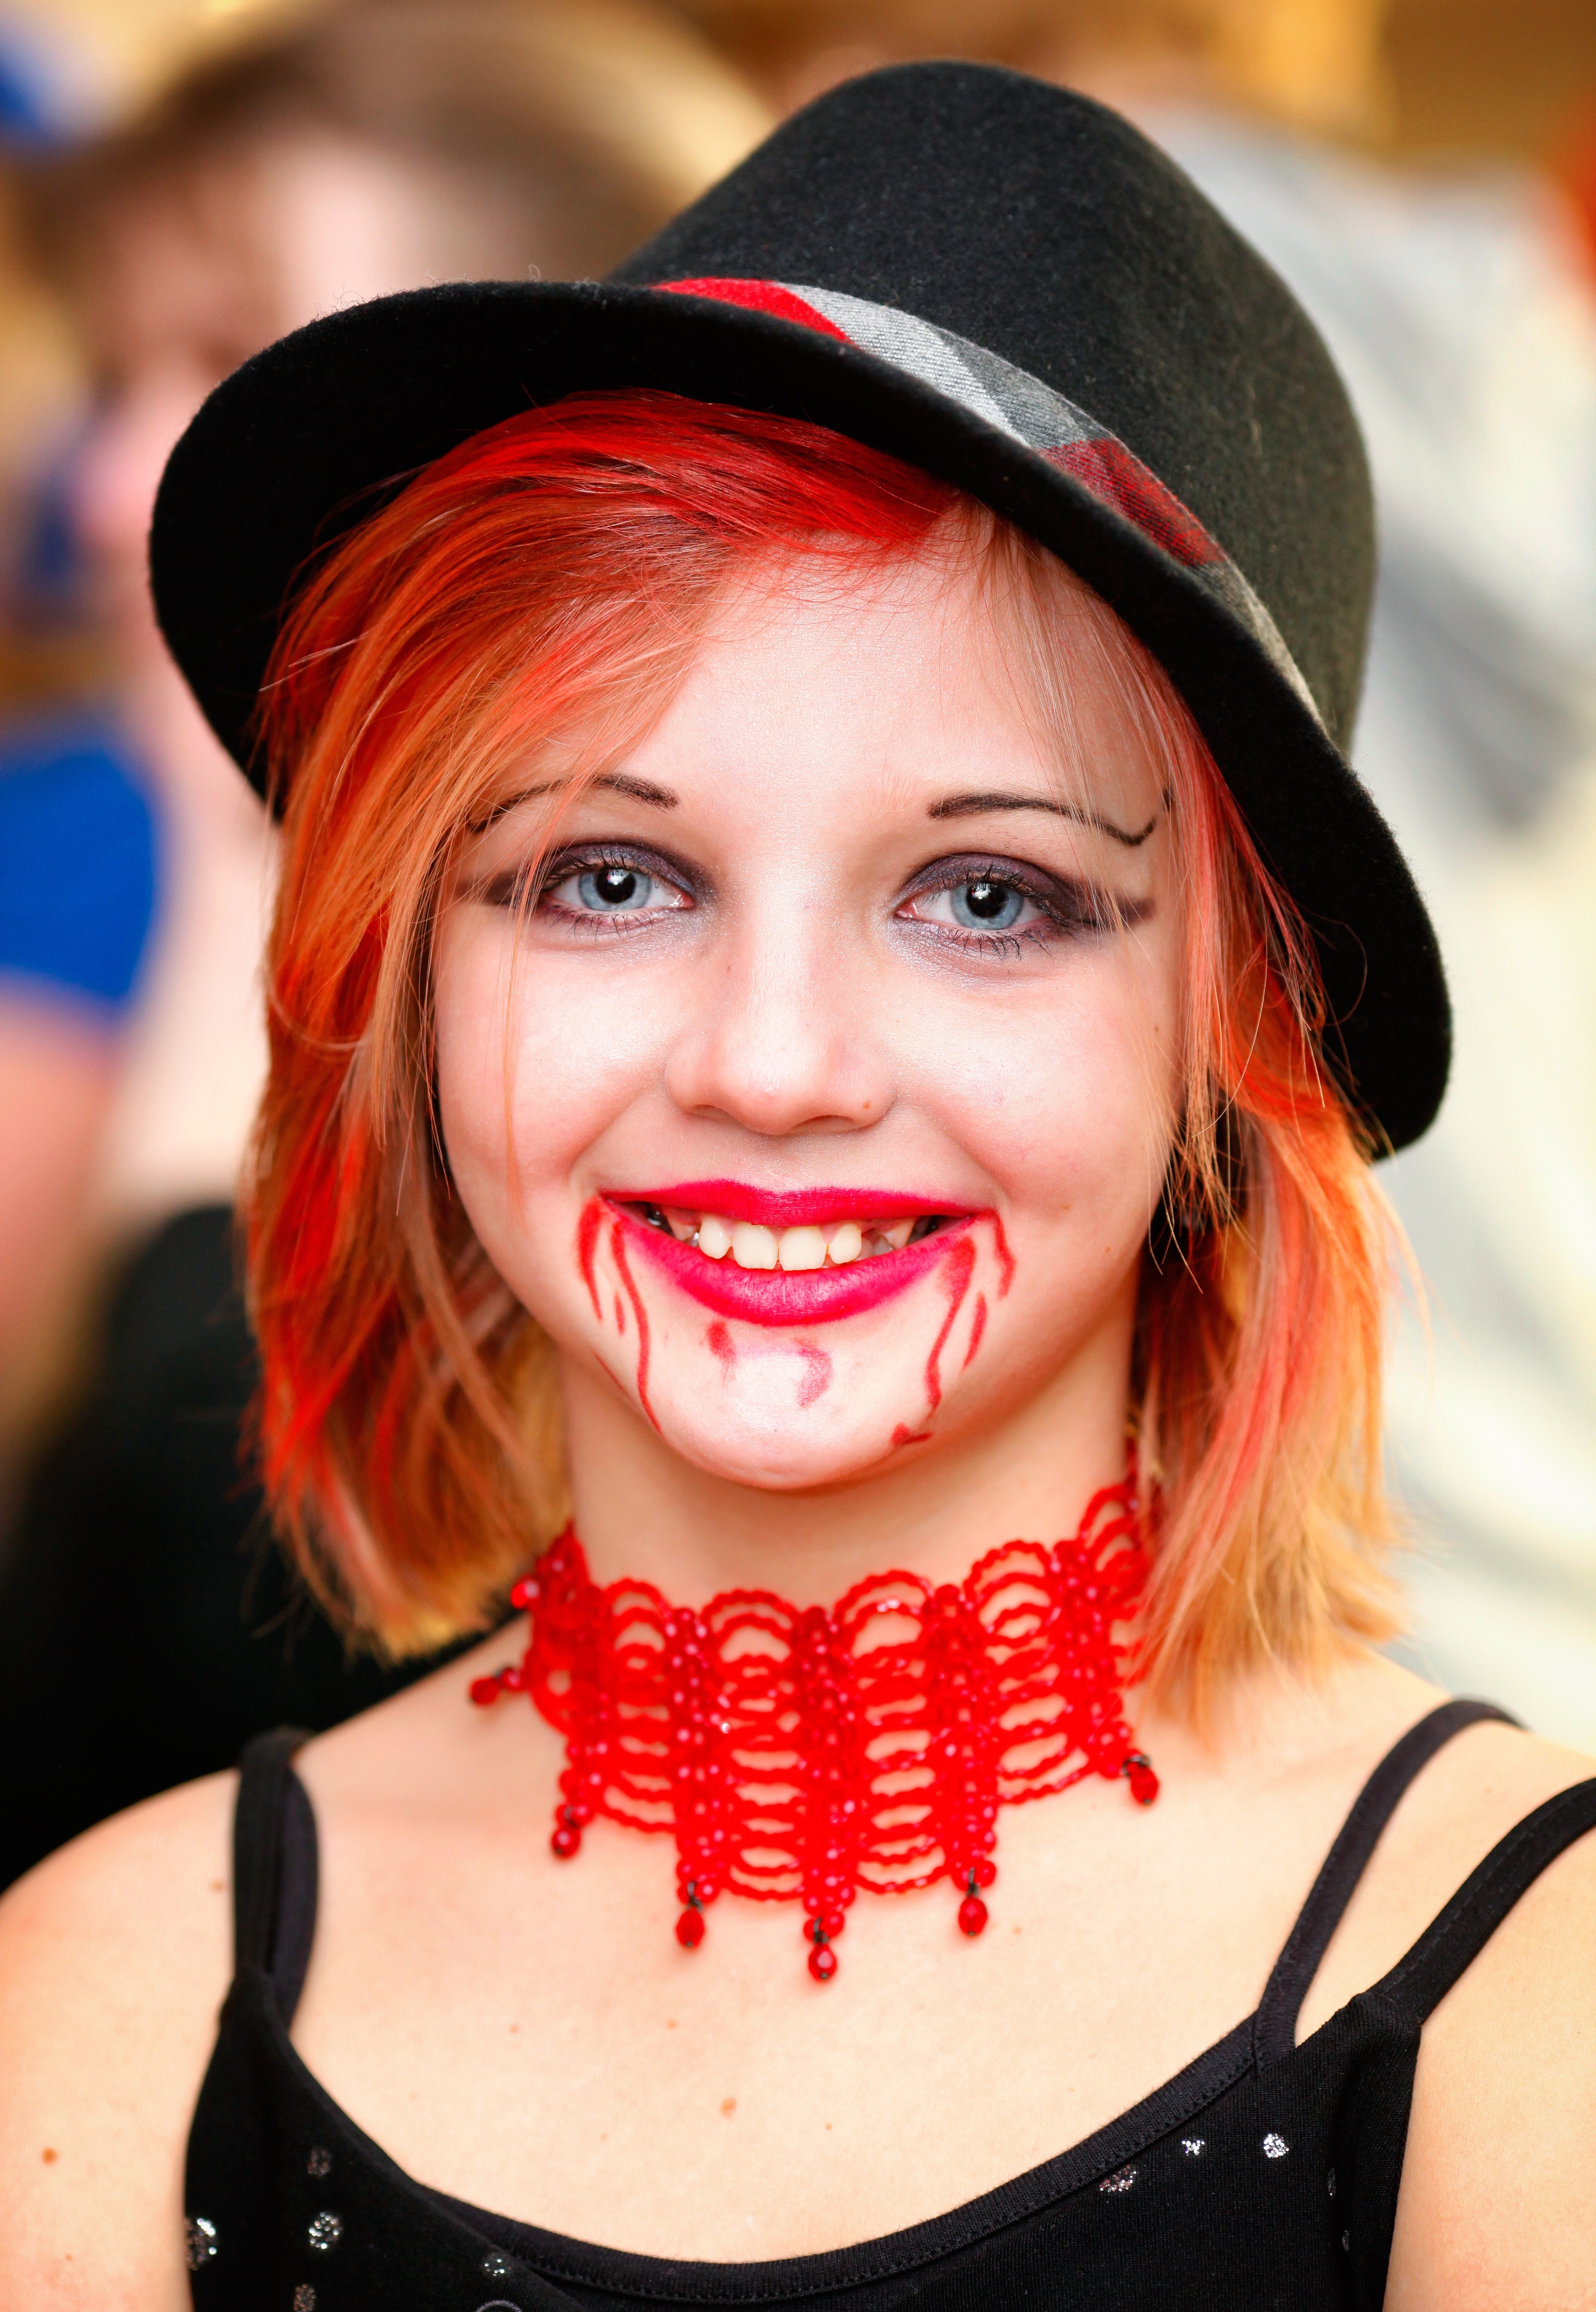 woman wearing black hat and red choker during daytime